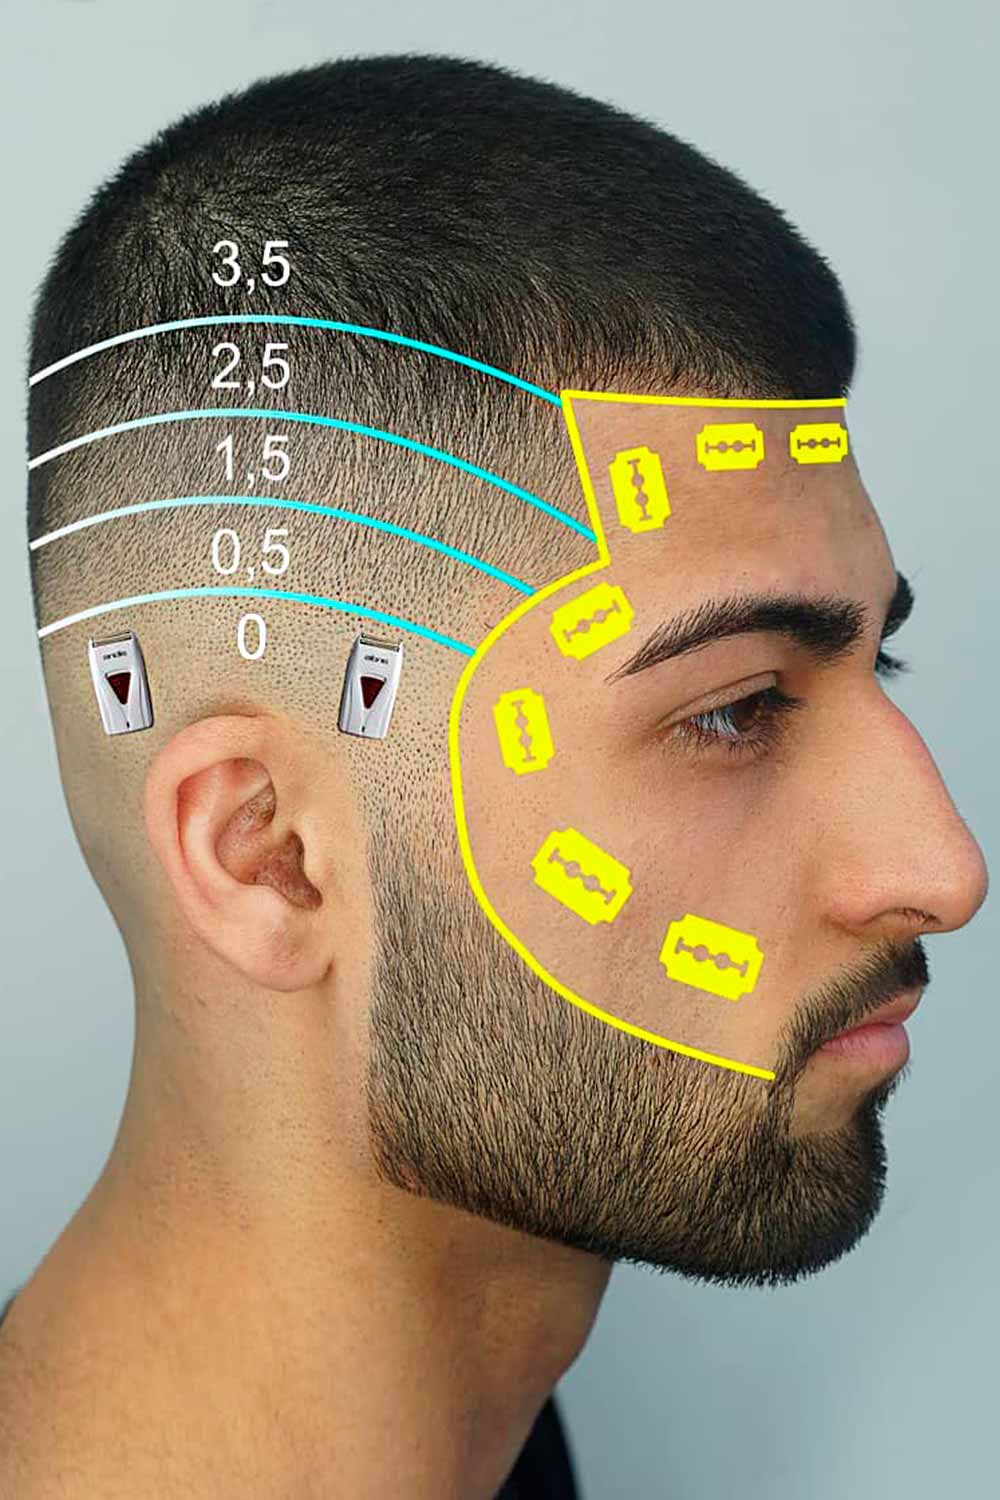 Haircut Numbers And Hair Clipper Sizes #haircutnumbers #hairclippersizes